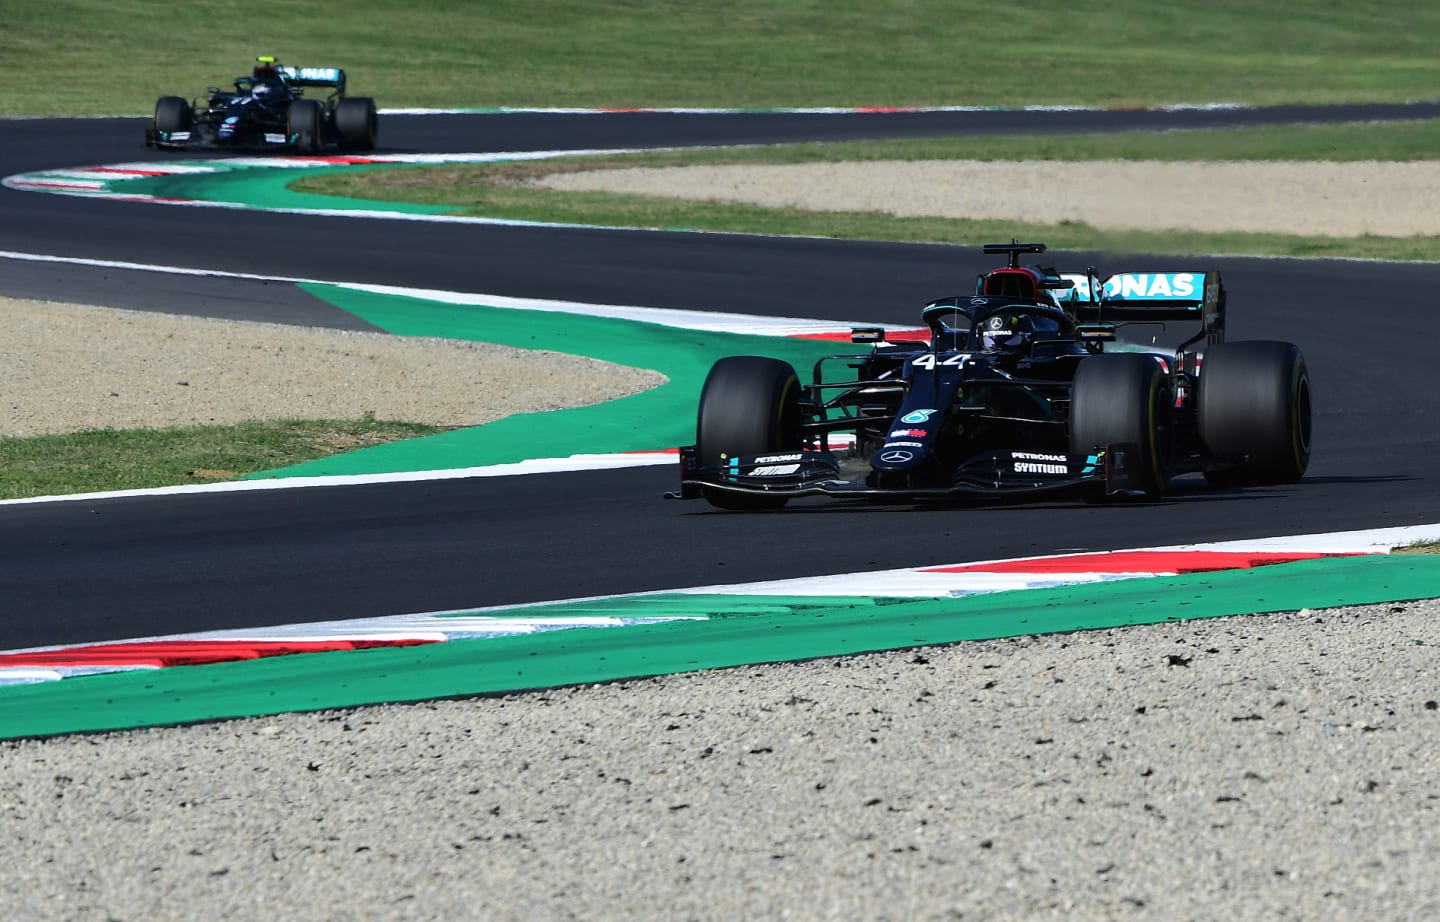 SCARPERIA, ITALY - SEPTEMBER 13: Lewis Hamilton of Great Britain driving the (44) Mercedes AMG Petronas F1 Team Mercedes W11 on track during the F1 Grand Prix of Tuscany at Mugello Circuit on September 13, 2020 in Scarperia, Italy. (Photo by Jenifer Lorenzini - Pool/Getty Images)